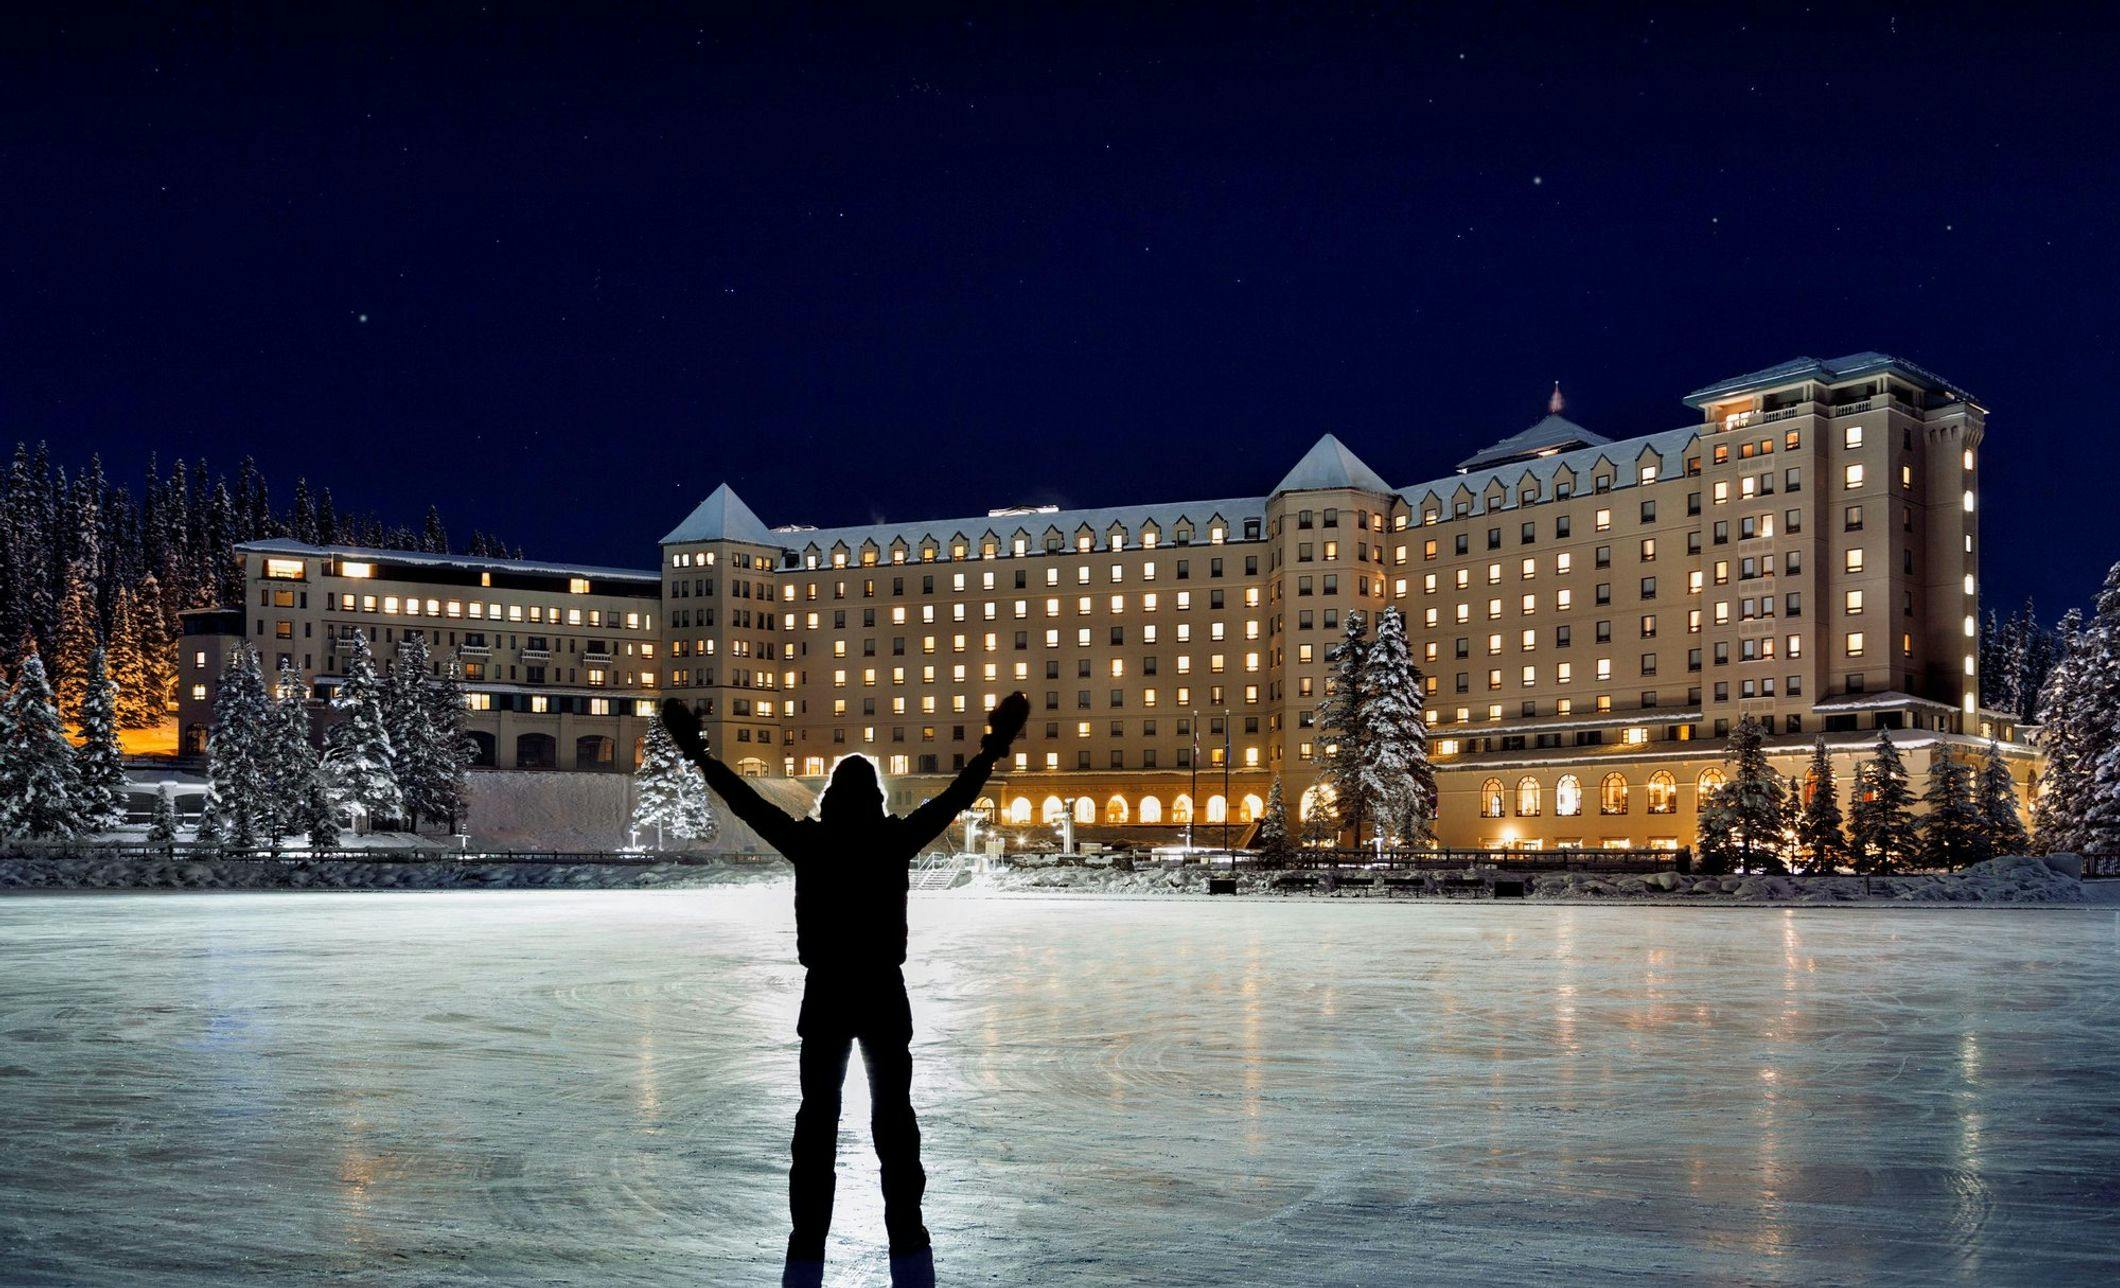 A skater stands on a lit outdoor natural skating rink at night with a large, well lit hotel next to the skating rink